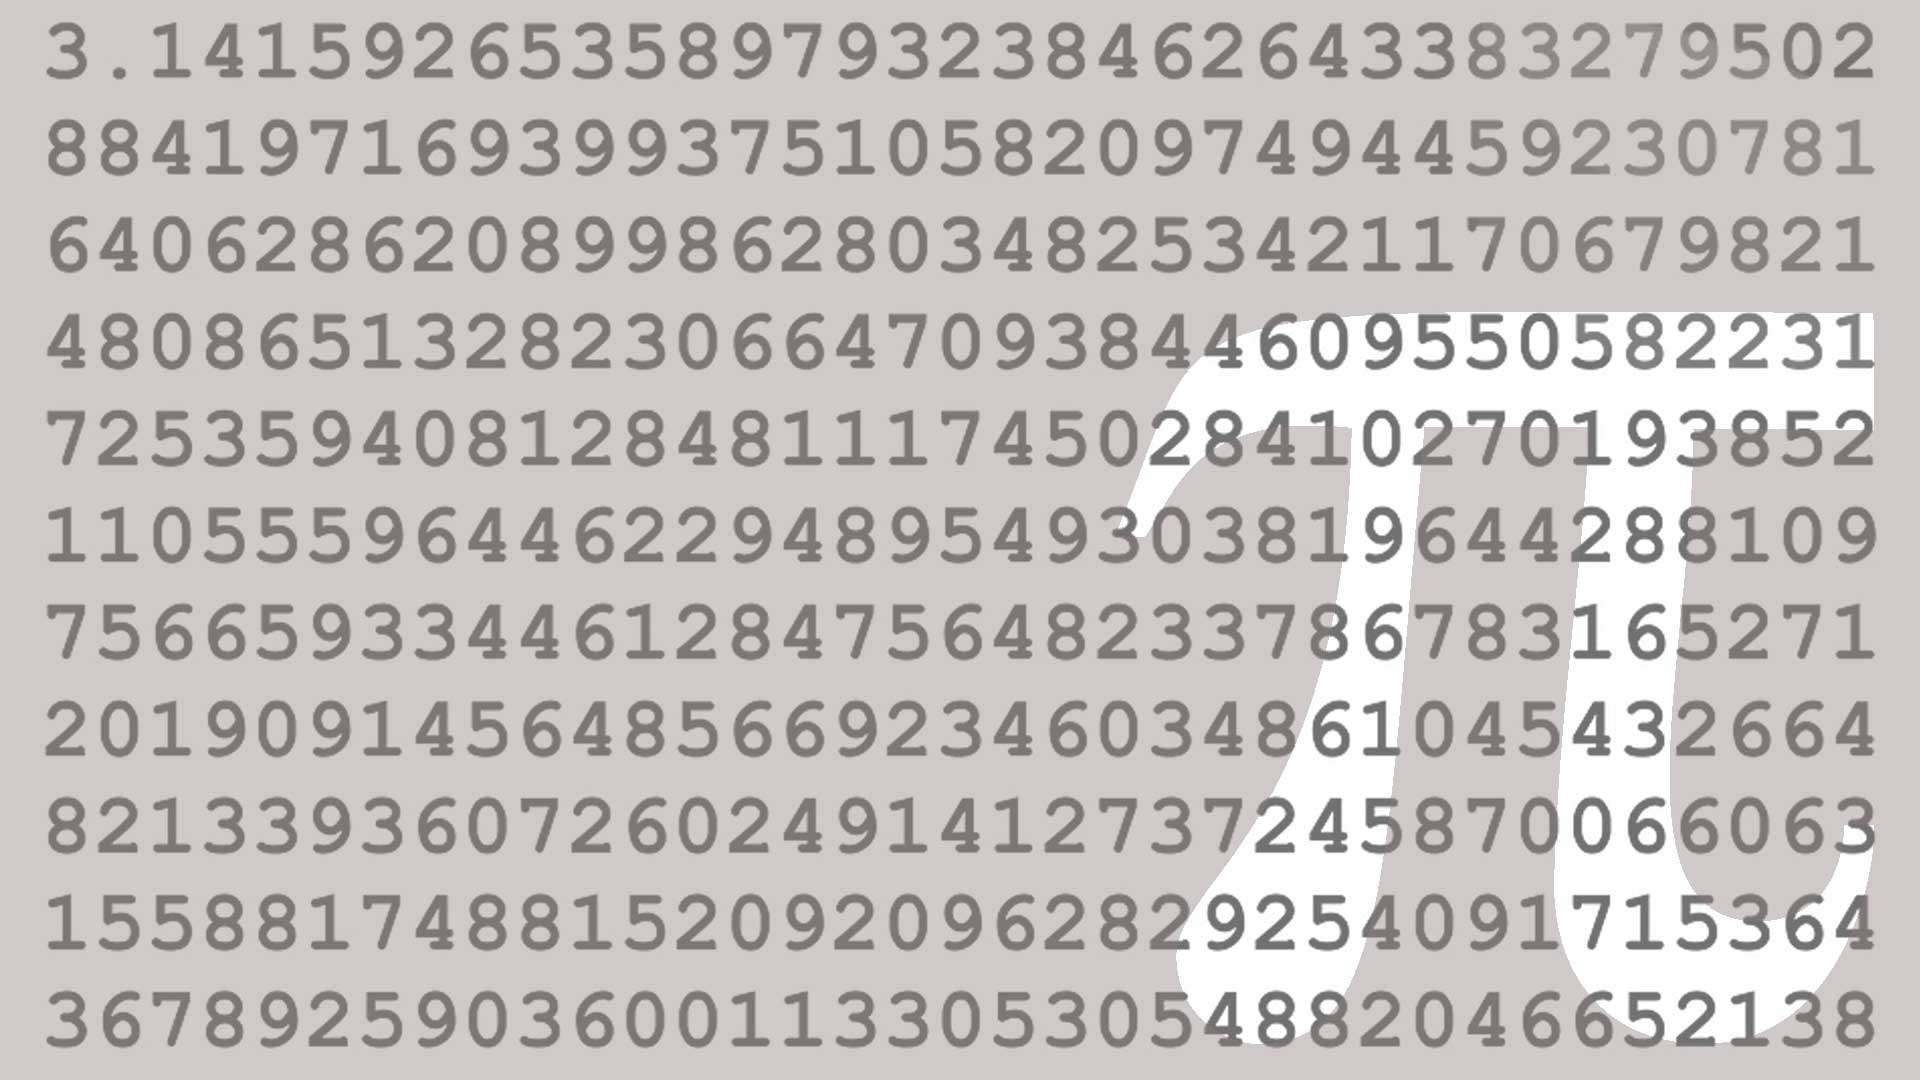 March 14 is international Pi Day.